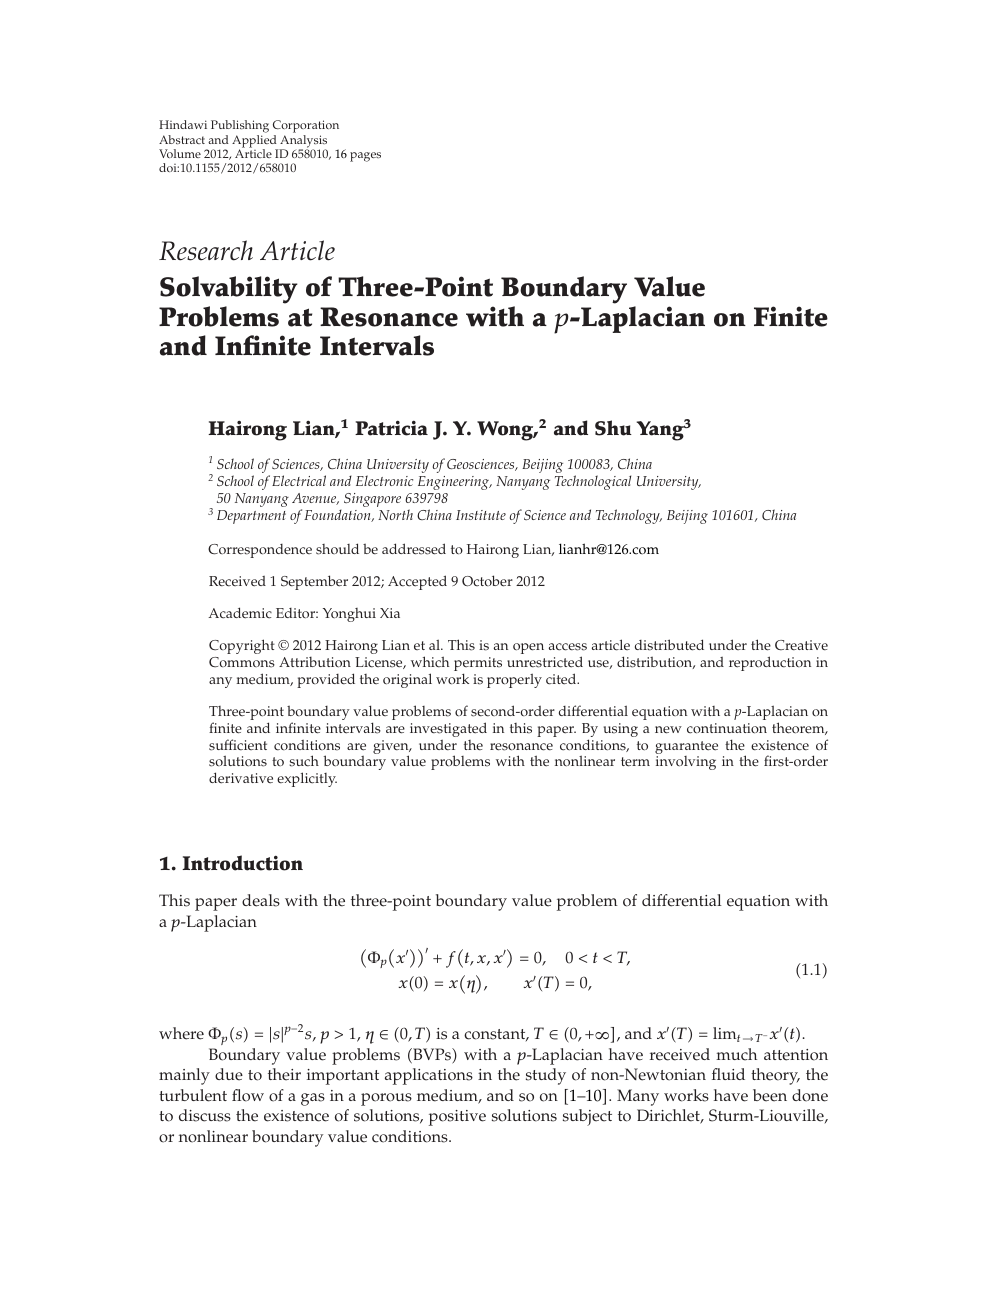 Solvability Of Three Point Boundary Value Problems At Resonance With A P Laplacian On Finite And Infinite Intervals Topic Of Research Paper In Mathematics Download Scholarly Article Pdf And Read For Free